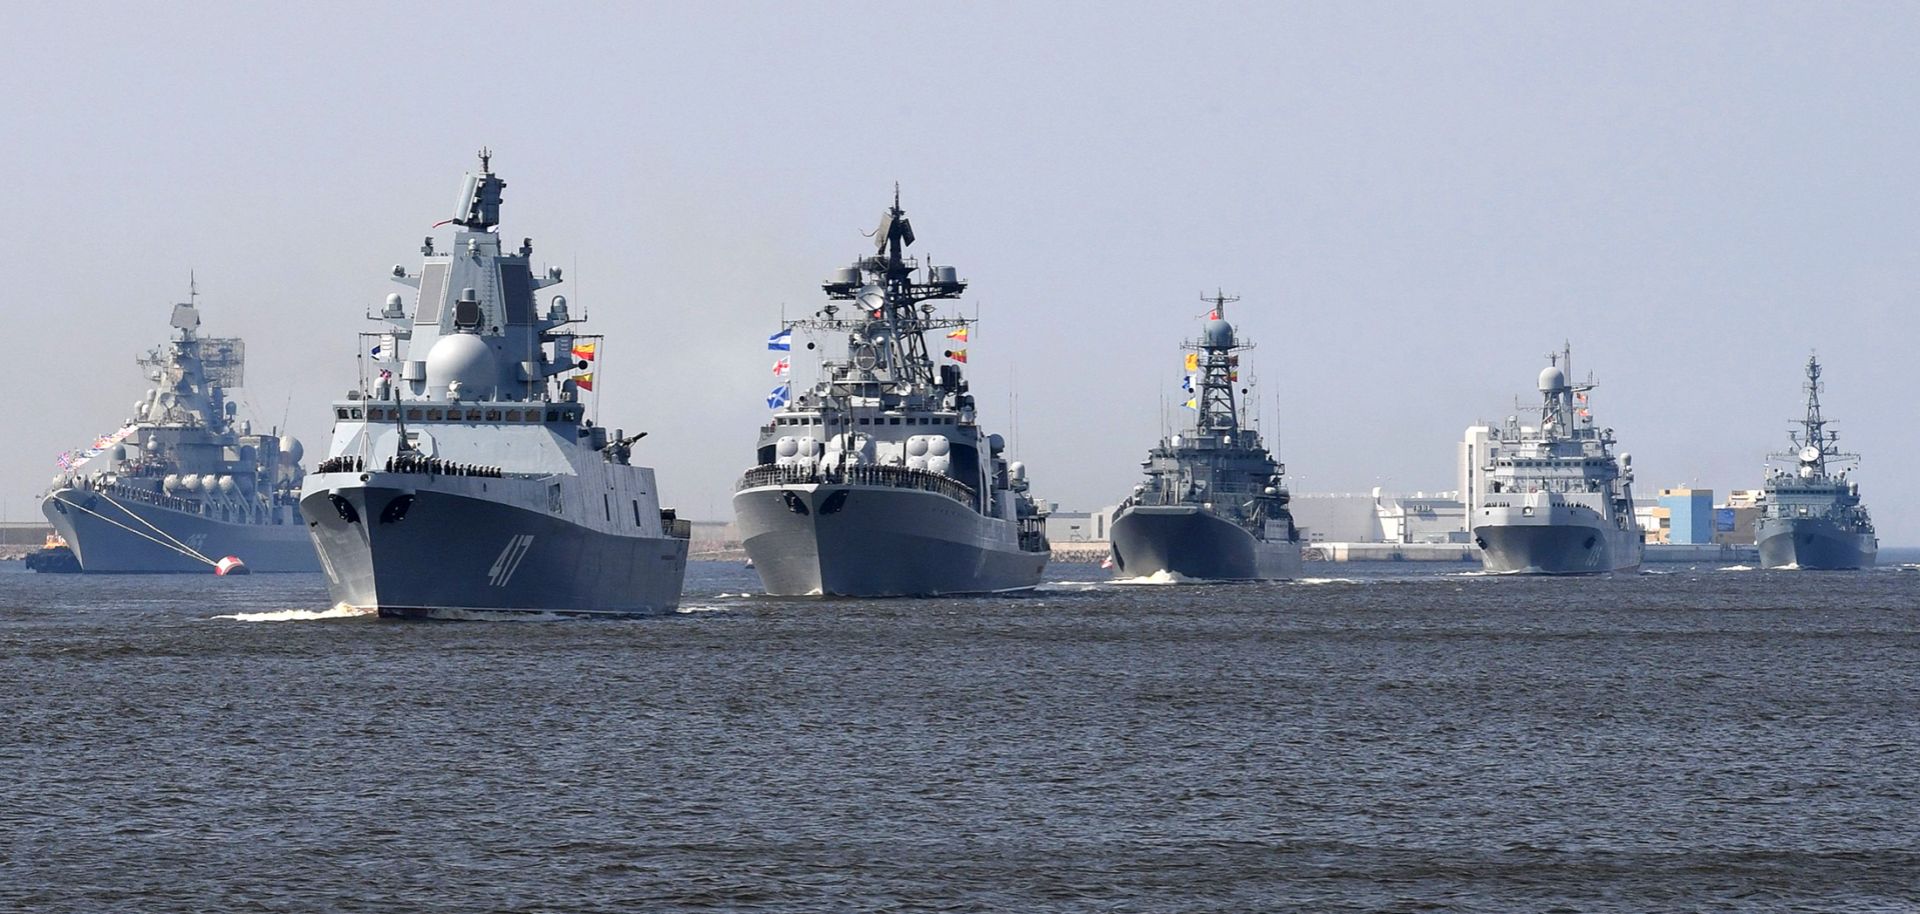 Russian navy ships, among them the Russian frigate Admiral Gorshkov, second from left, sail near Kronshtadt naval base outside St. Petersburg on July 20, 2018.